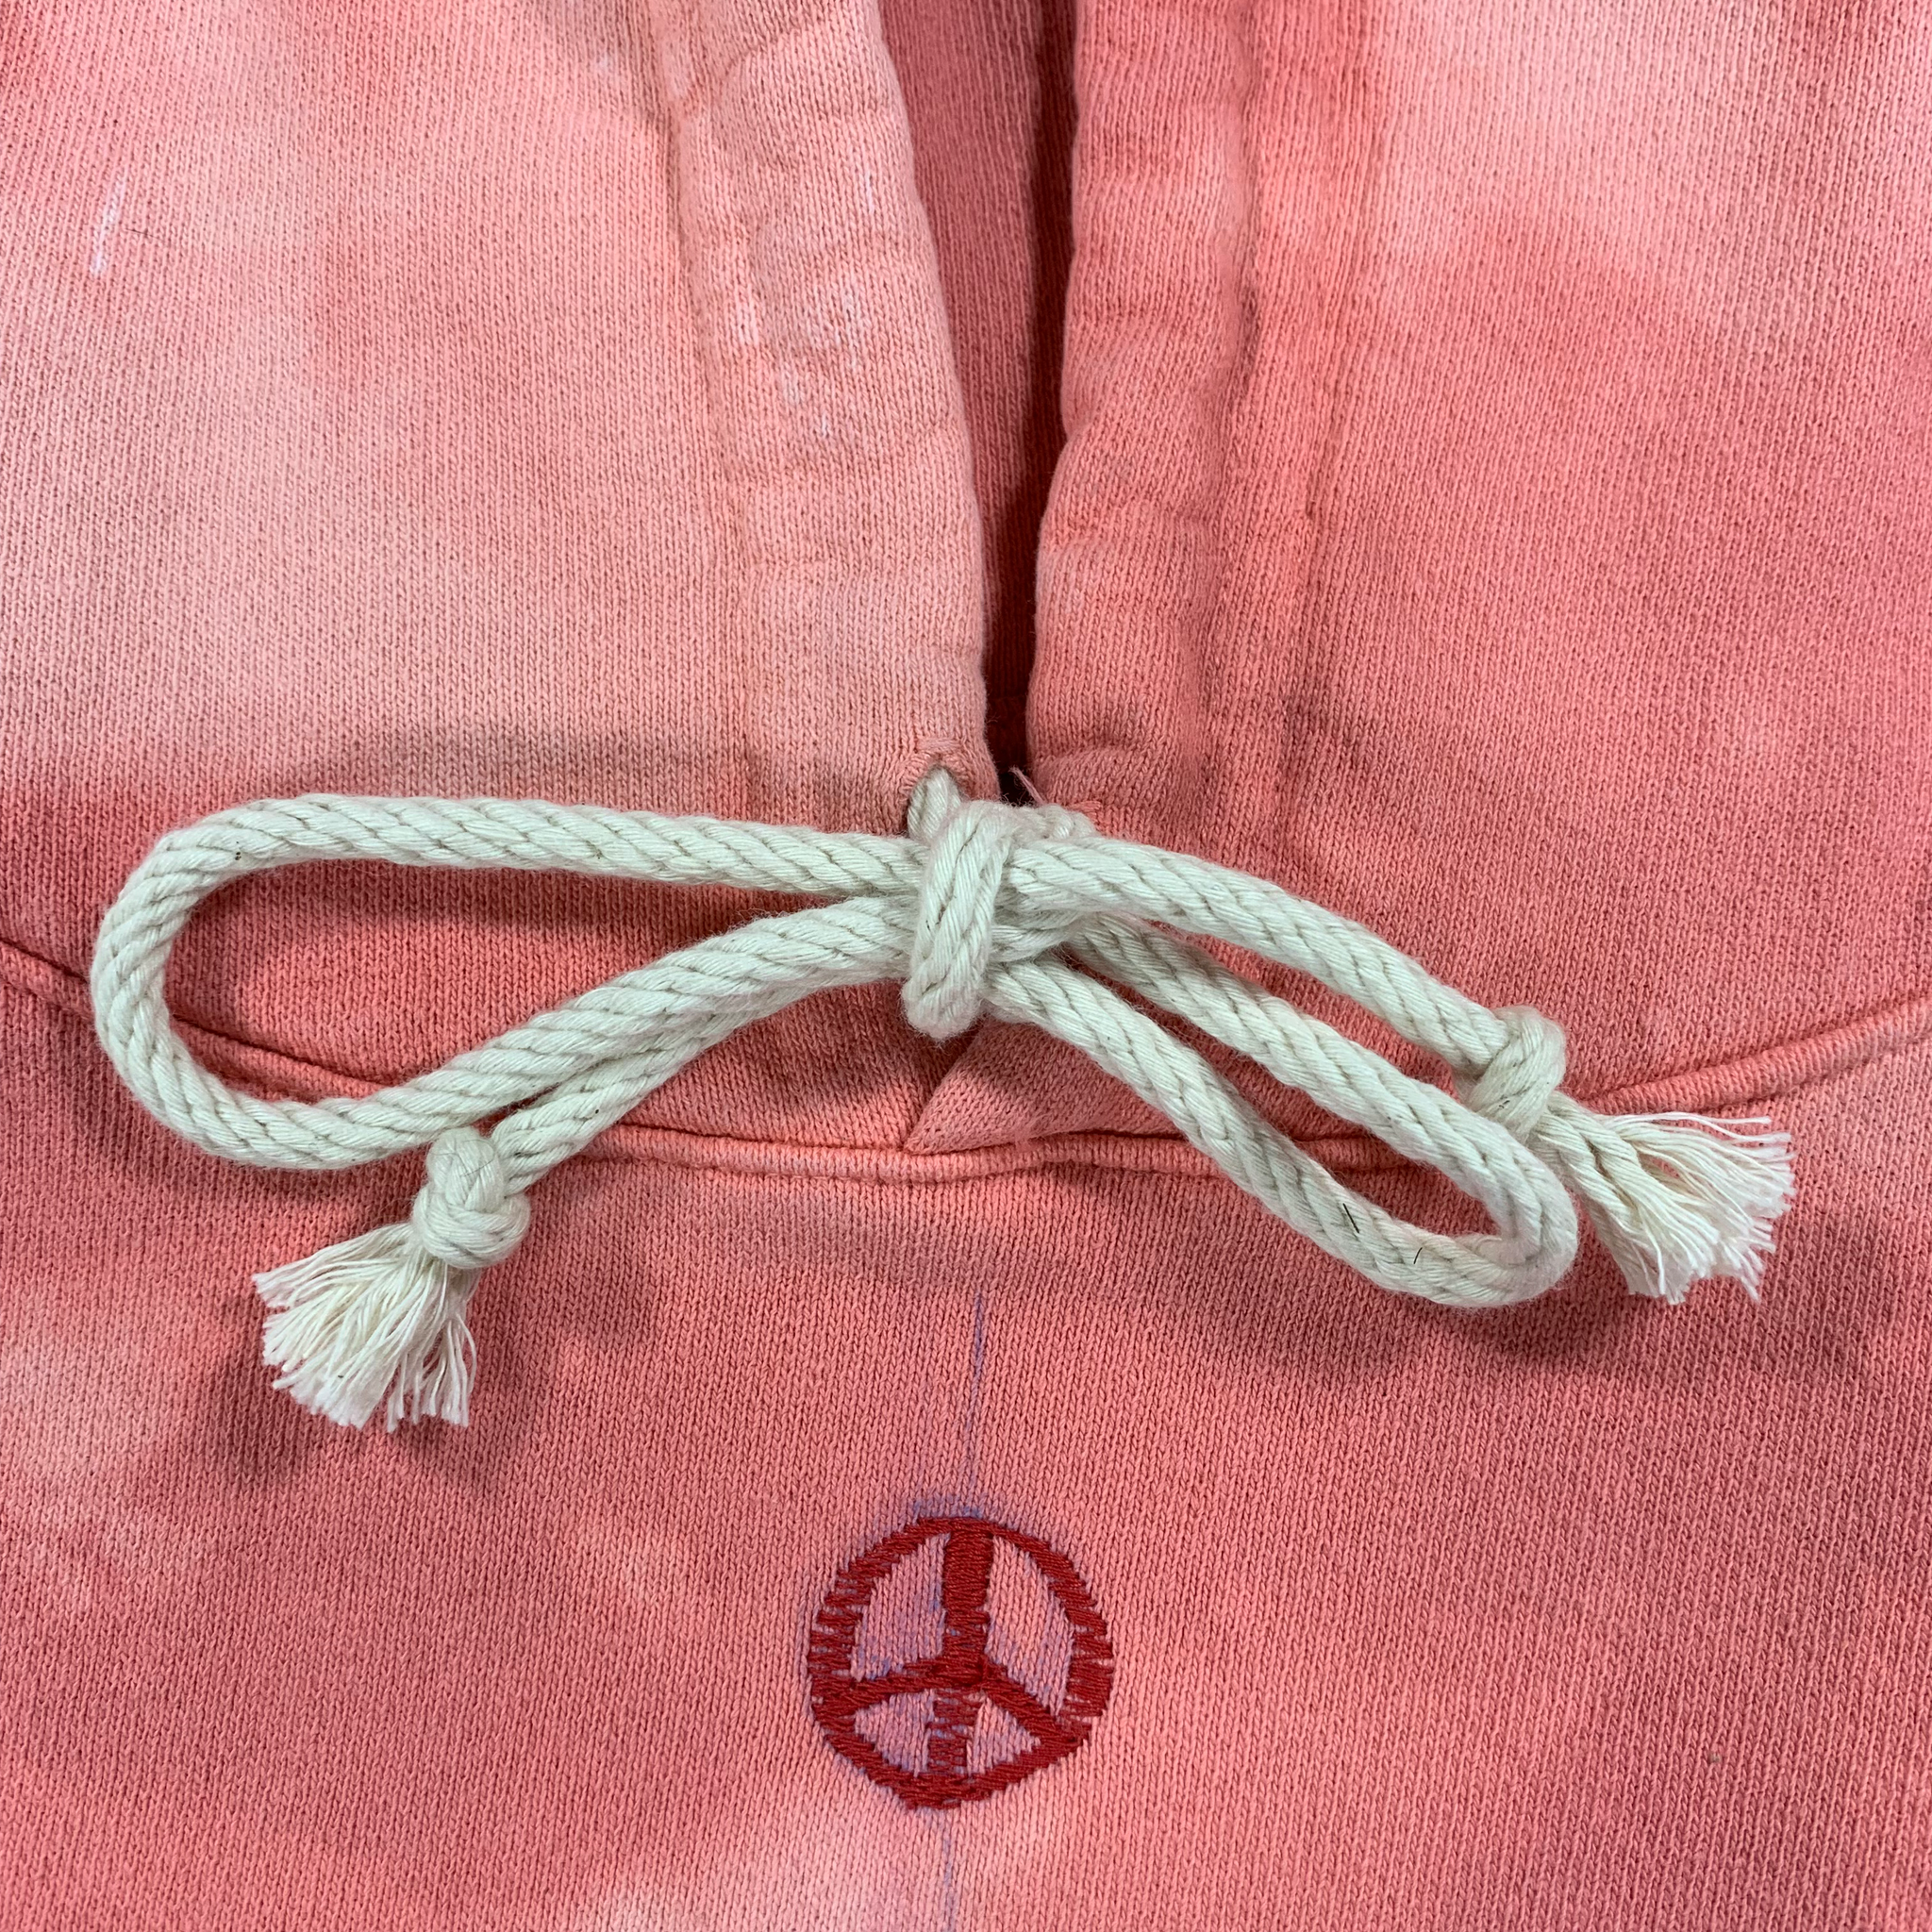 Embroidered and Dyed Hoodie - Small